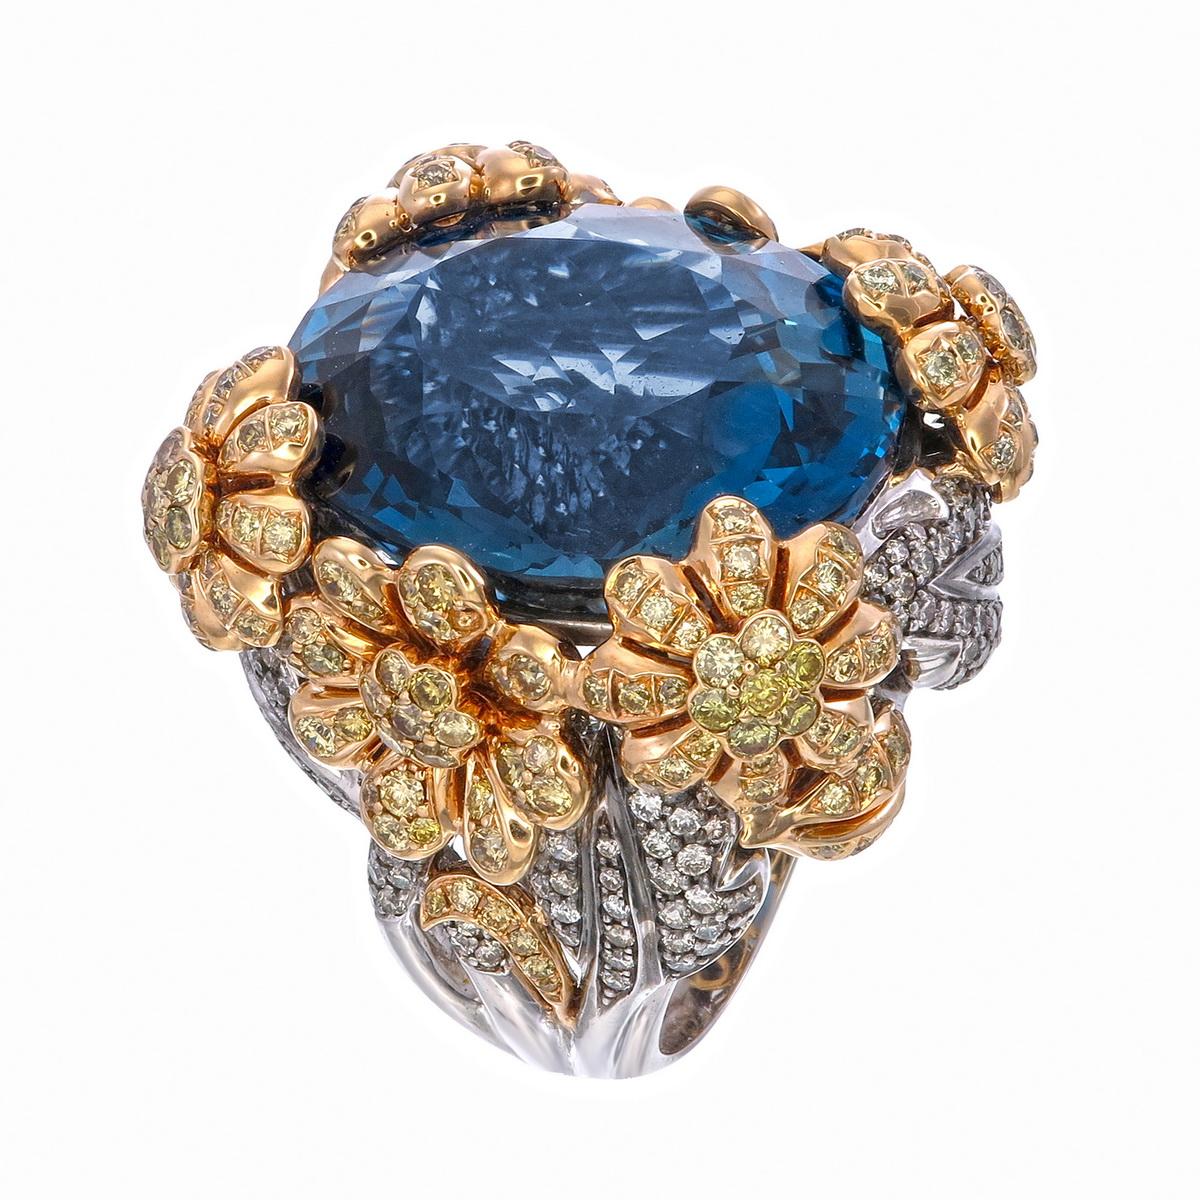 A 57.21-carat Blue Topaz Flowers Ring with 3.38 carats Yellow  Diamonds and 1.97 carats White Diamonds sounds like a stunning and luxurious piece of jewelry. Blue topaz is a semi-precious gemstone known for its striking blue color, and when set with